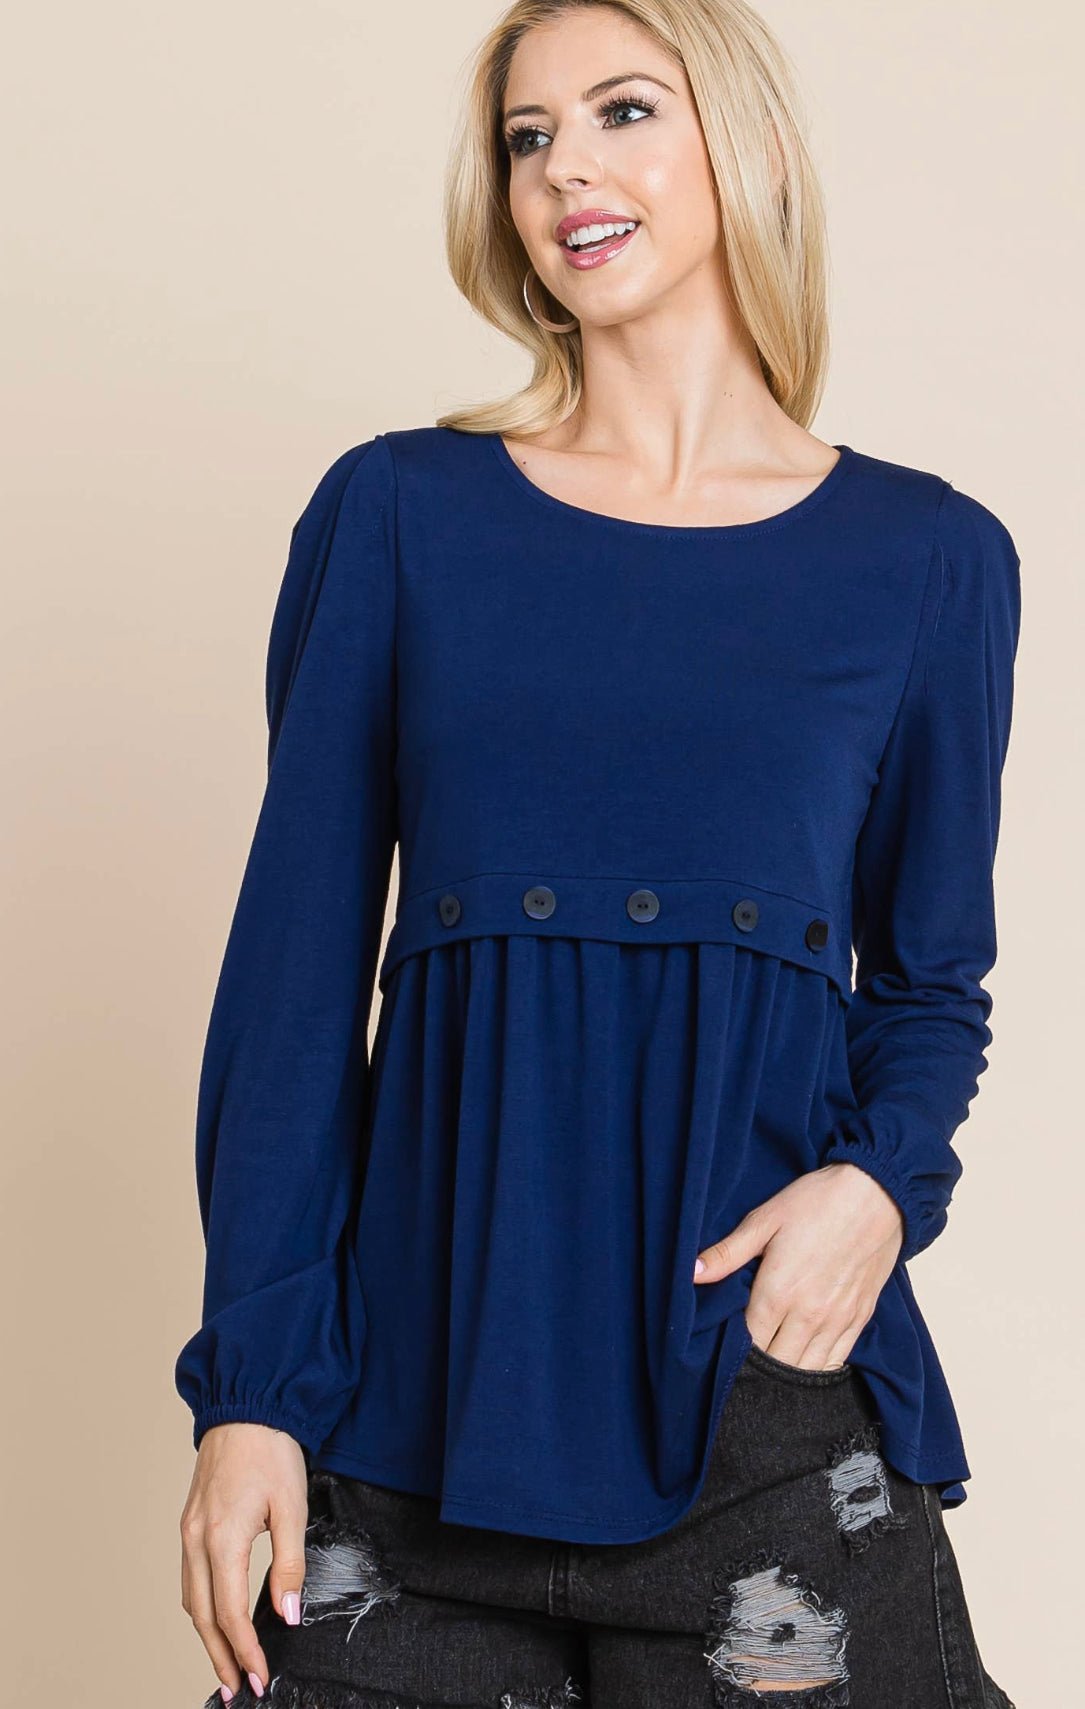 Looking for yourself navy top - Anchor Fusion Boutique